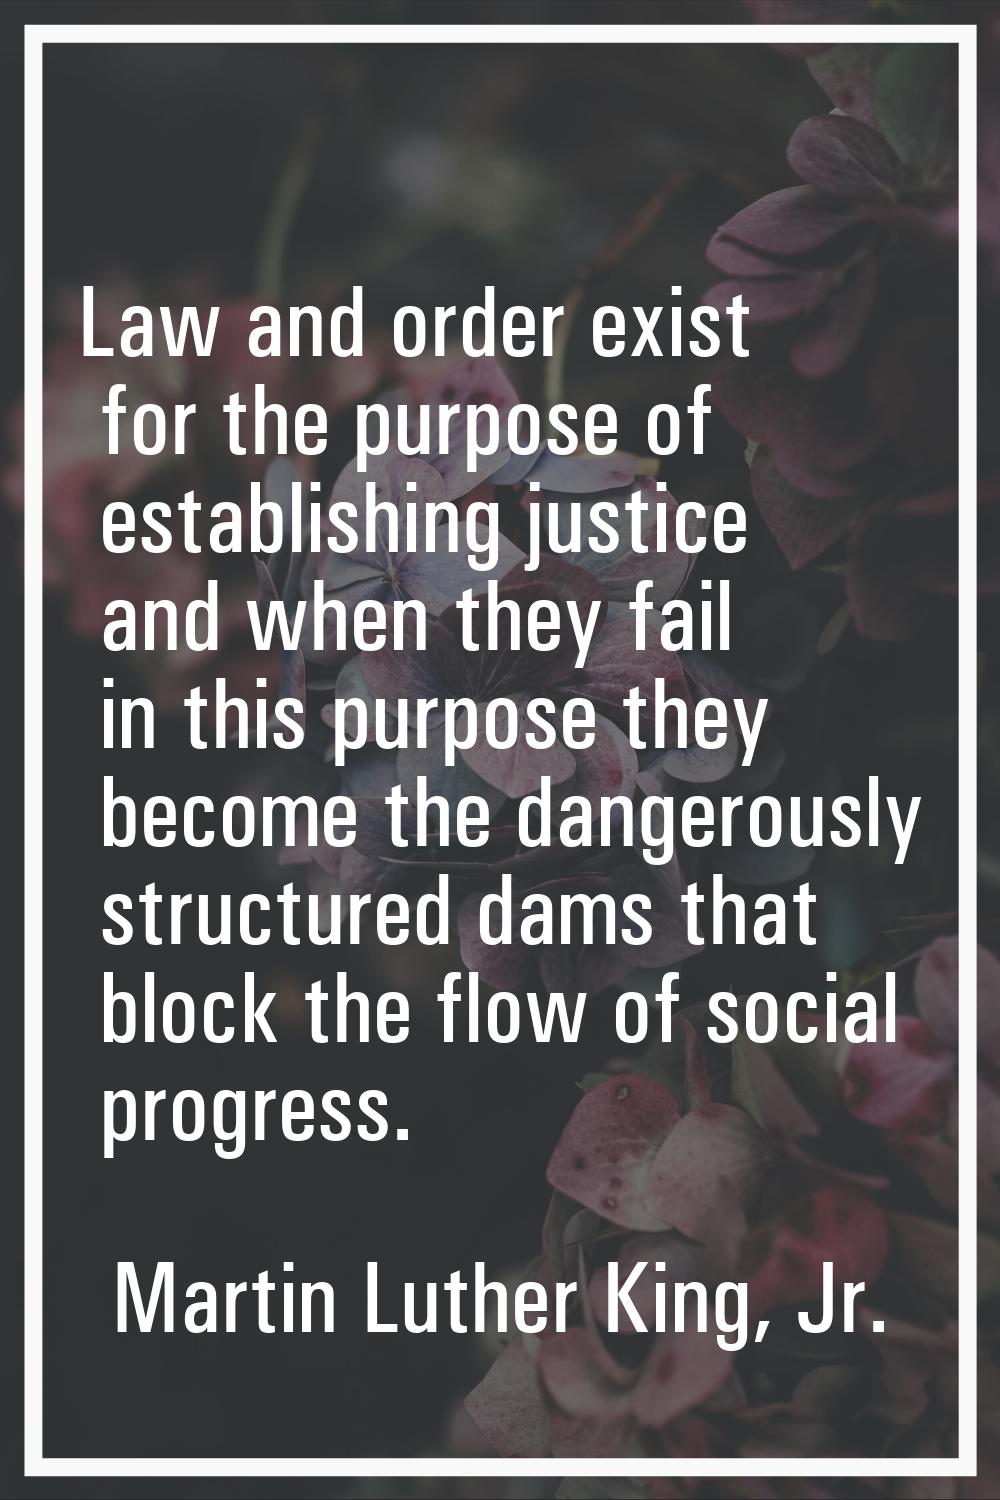 Law and order exist for the purpose of establishing justice and when they fail in this purpose they